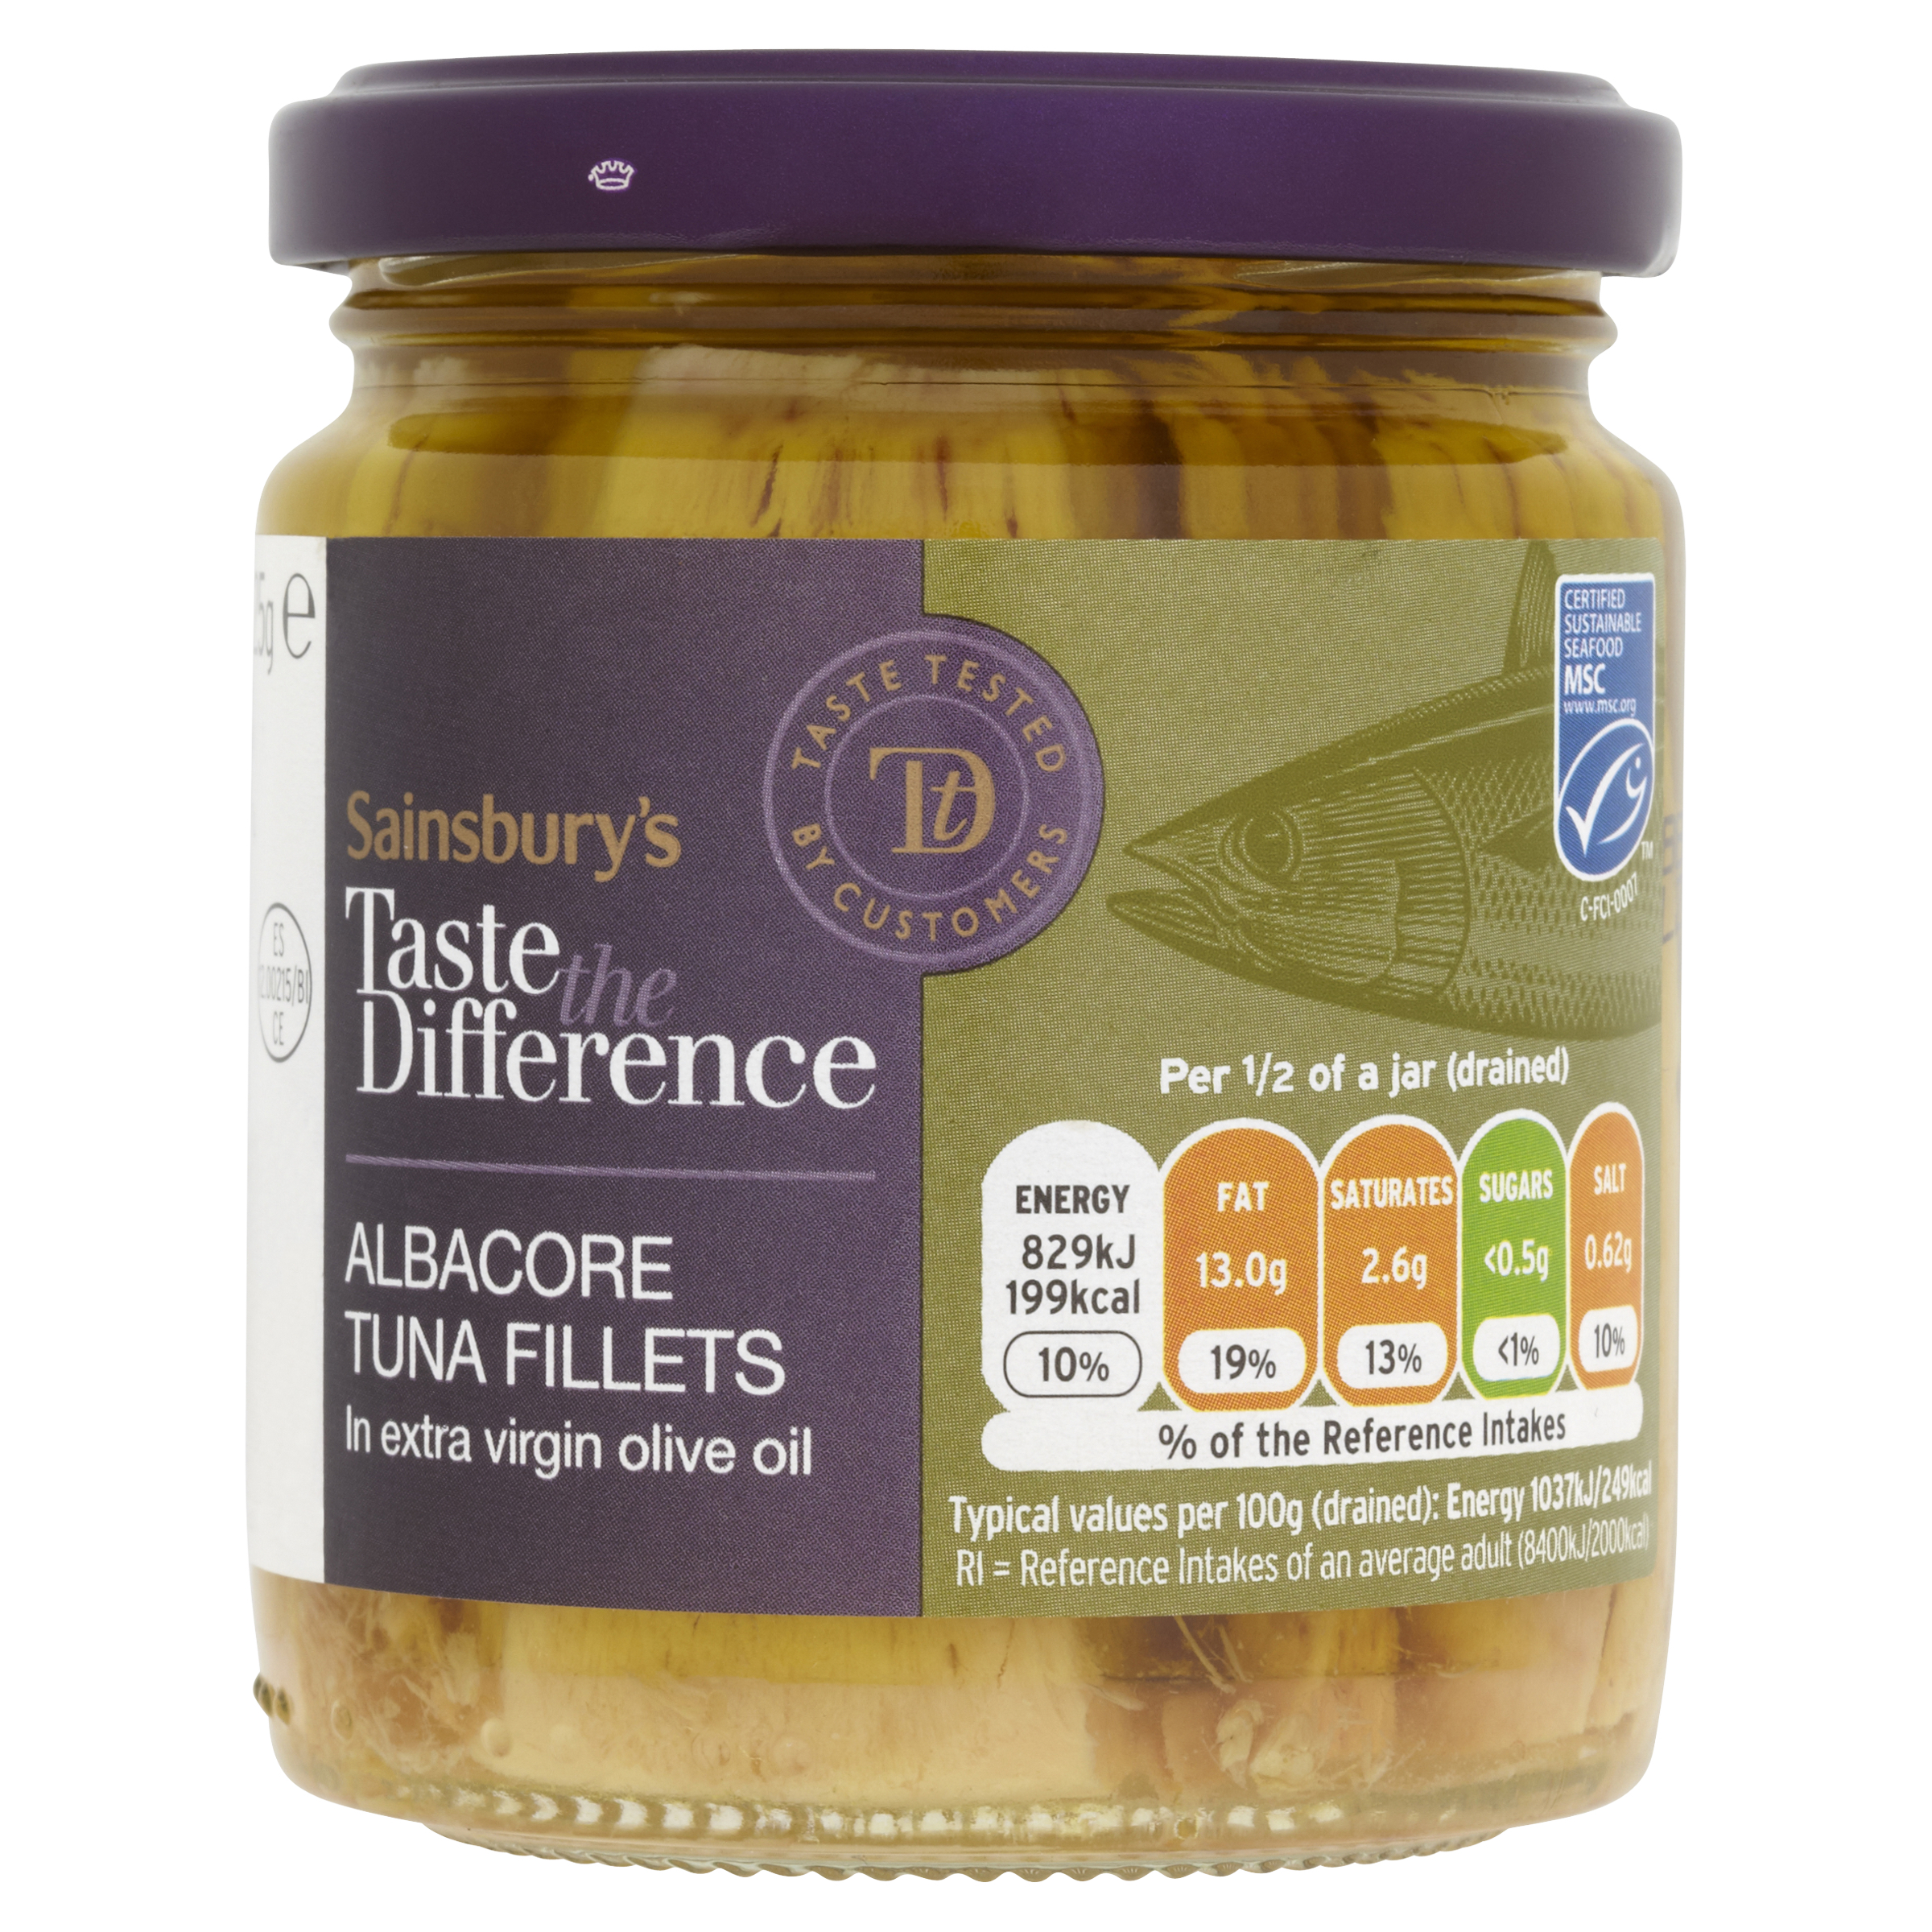 Sainsbury's Albacore Tuna in Extra Virgin Olive Oil, Taste the Difference 225g